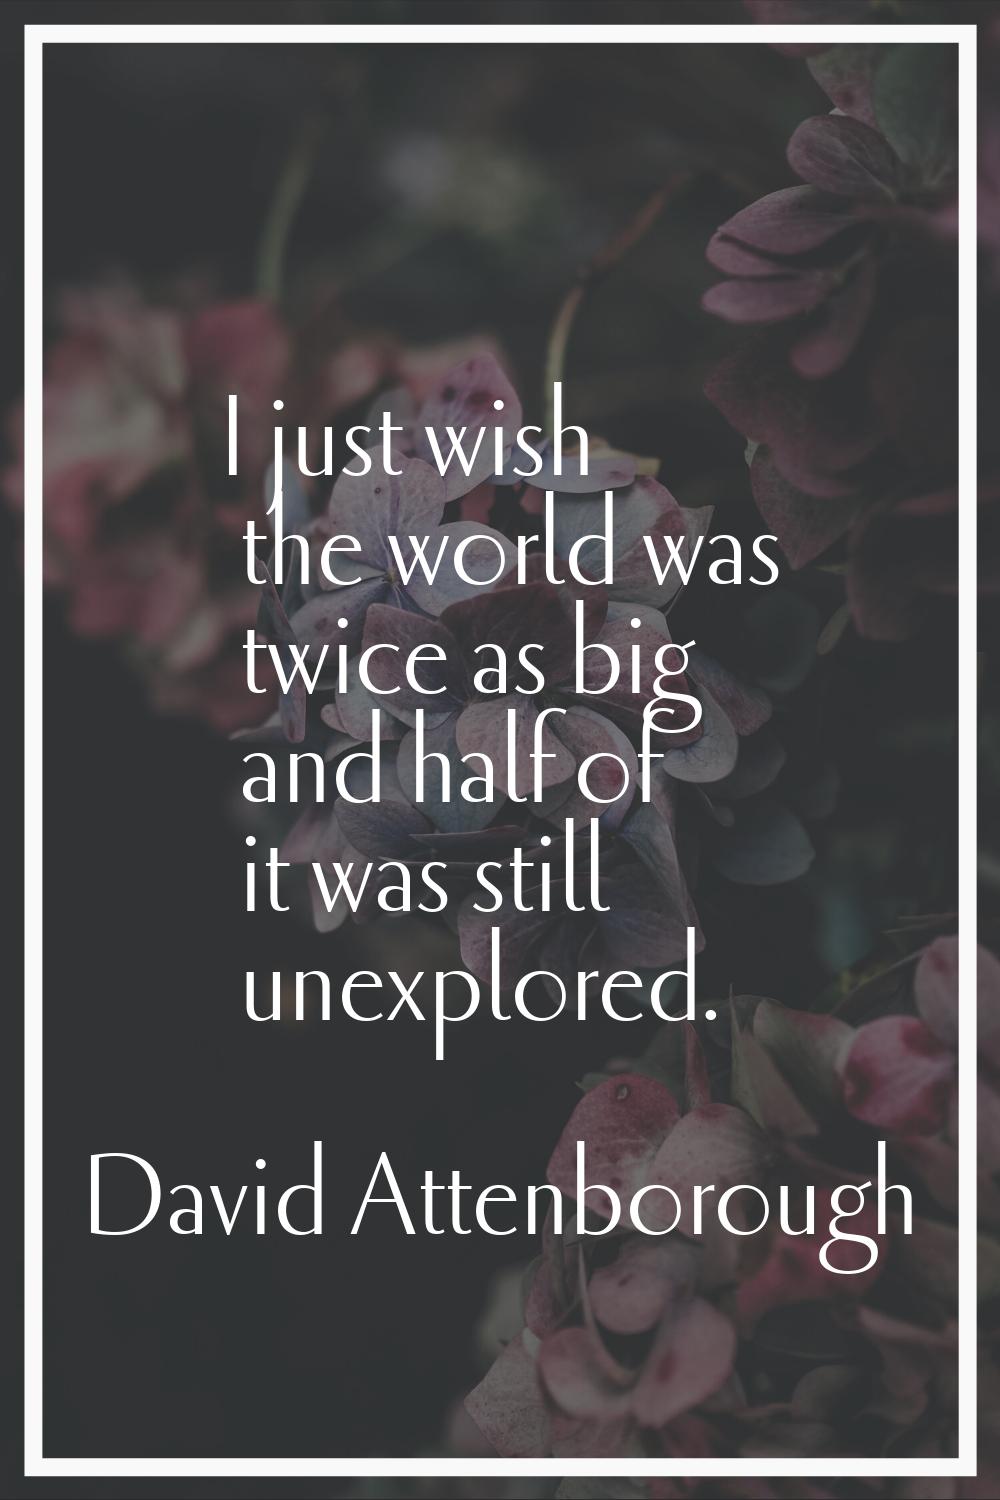 I just wish the world was twice as big and half of it was still unexplored.